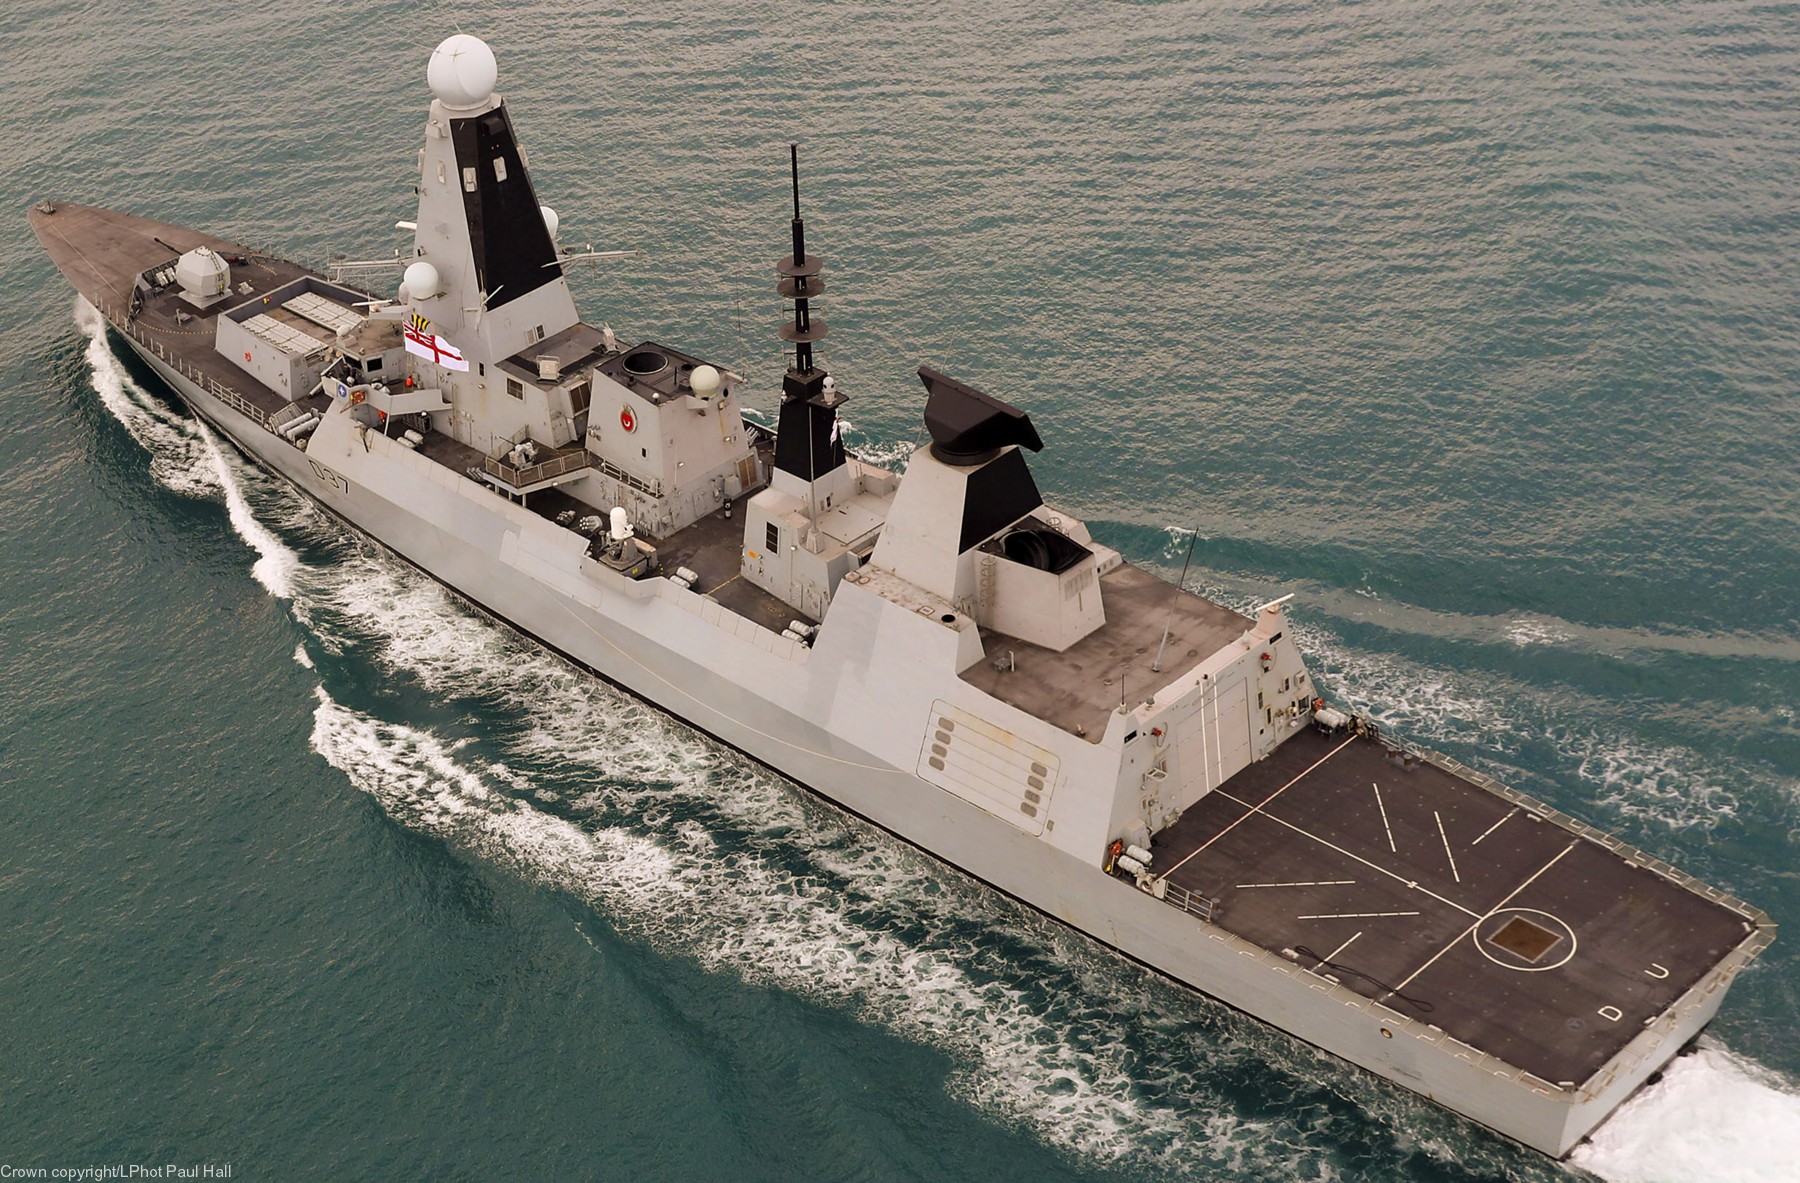 d37 hms duncan d-37 type 45 daring class guided missile destroyer ddg royal navy sea viper 26